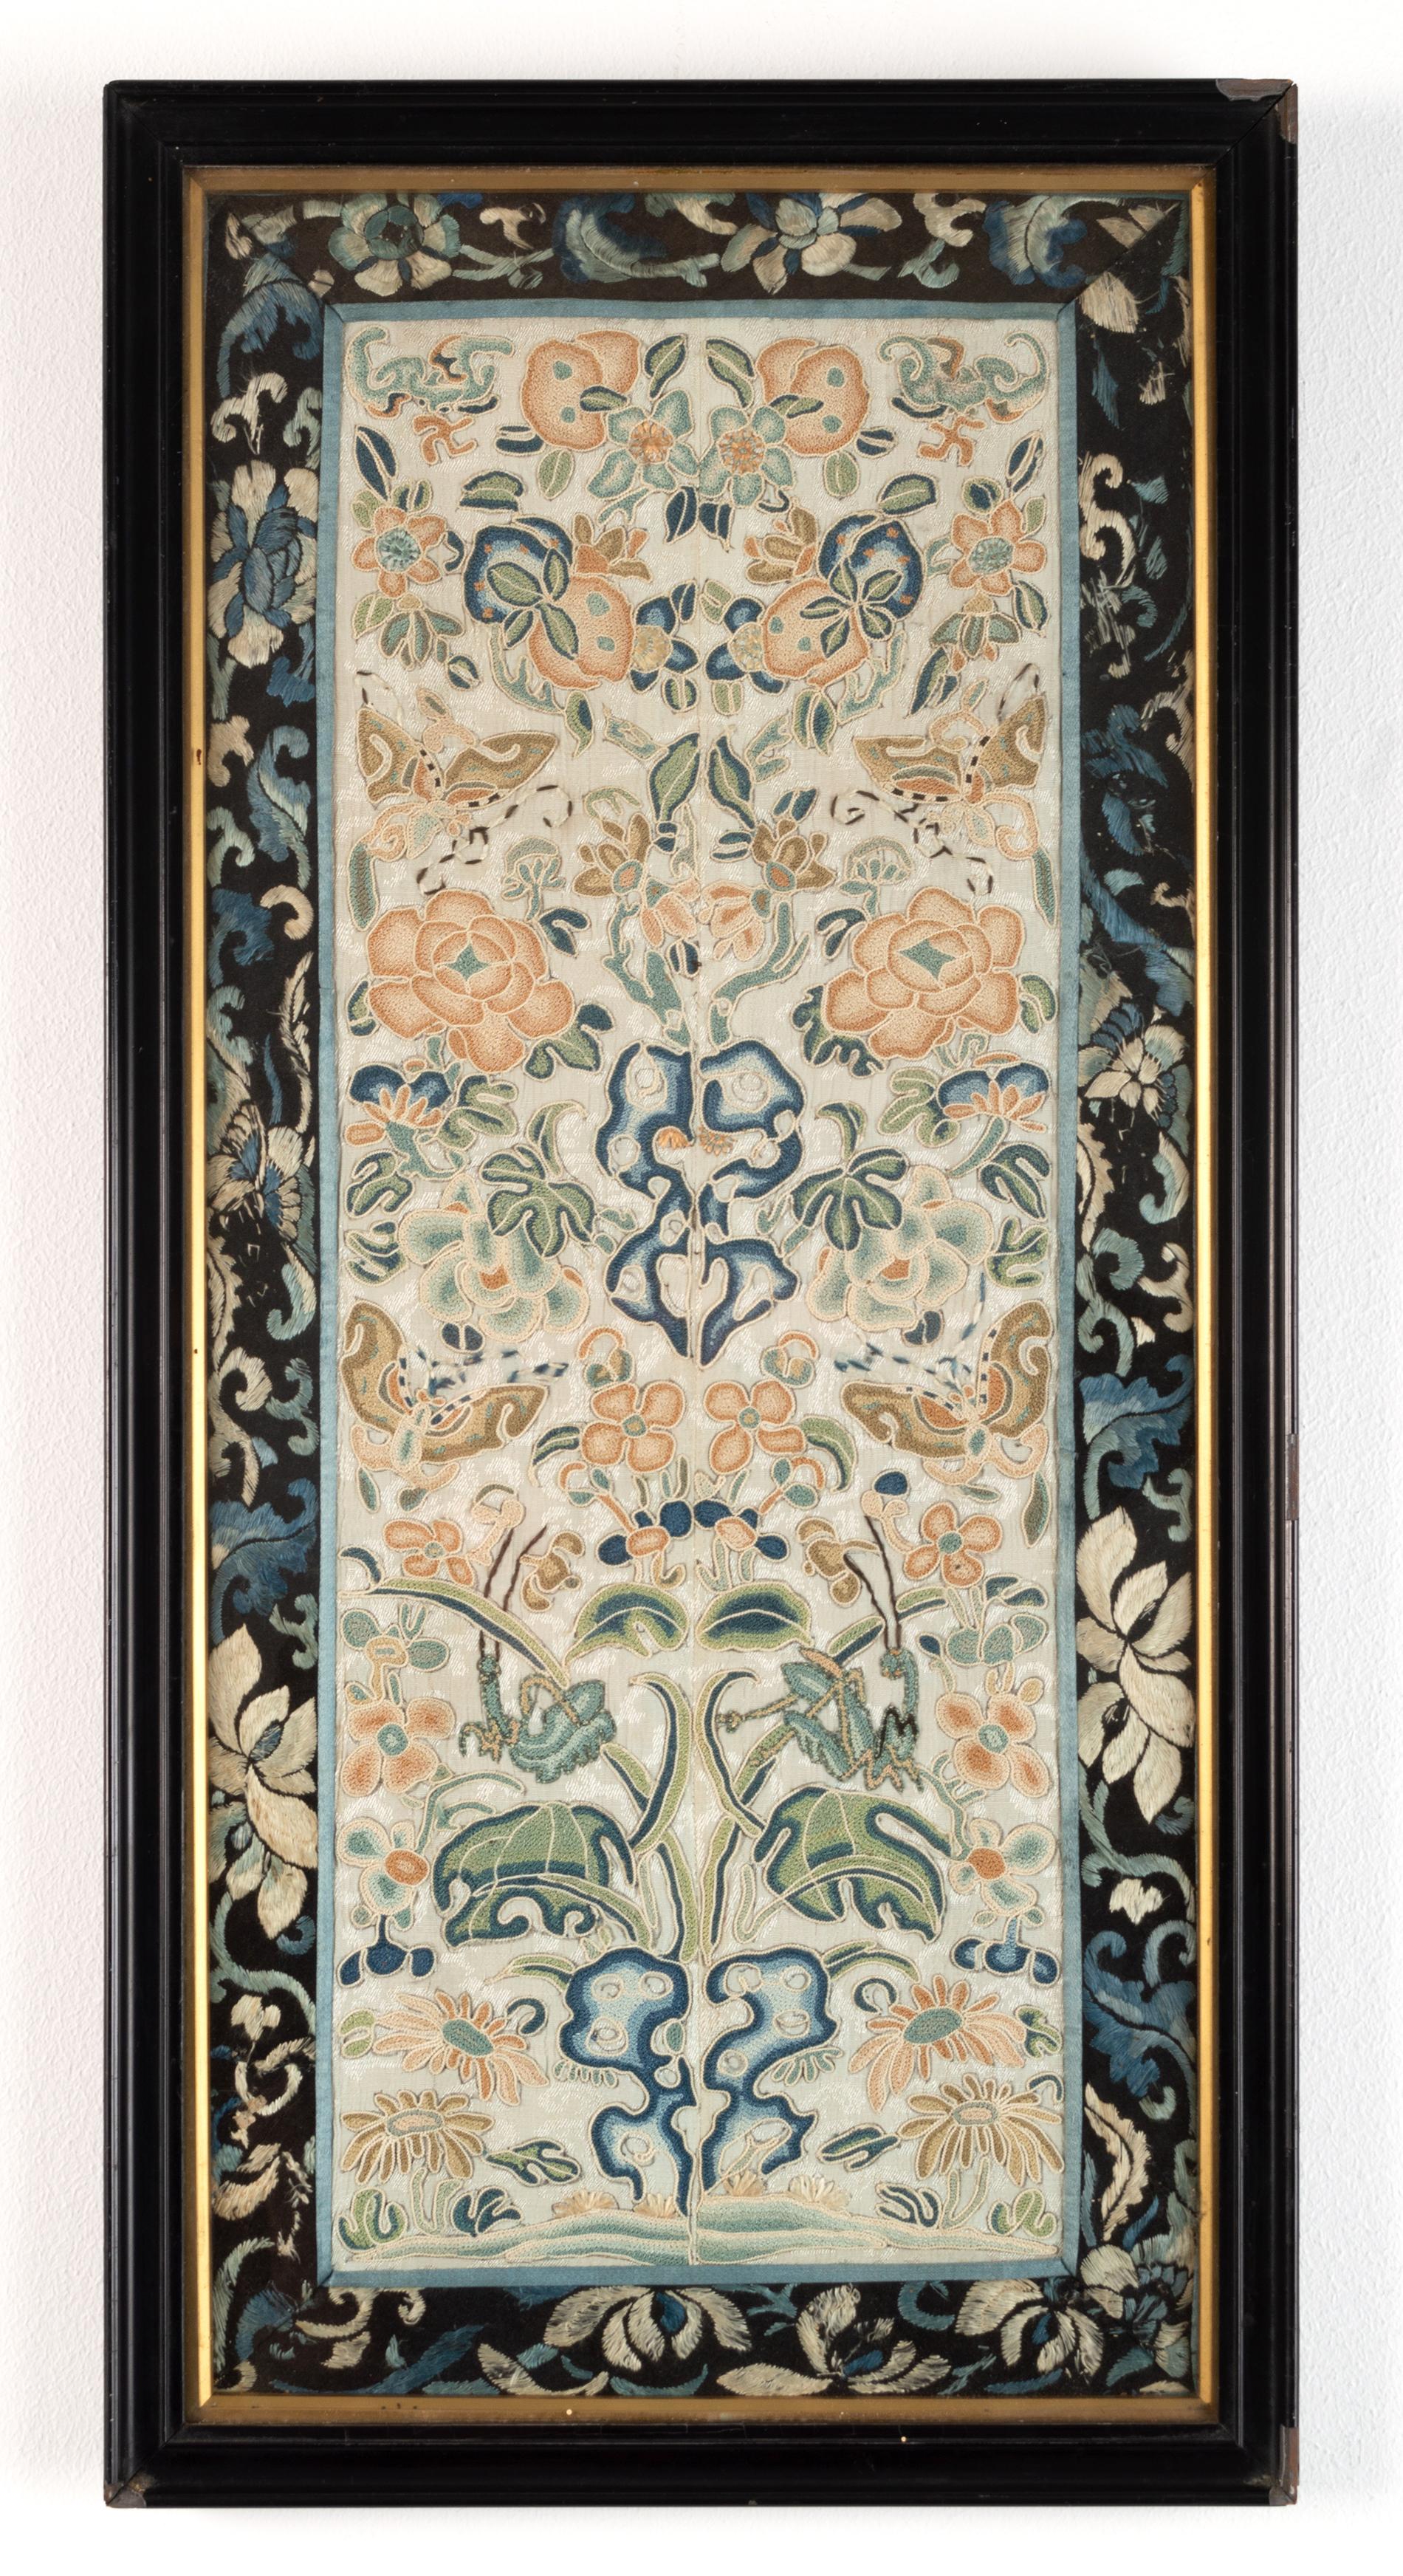 A Pair Of Chinese Embroidered Sleeve Panels. 
China, 19th Century, Qing Dynasty.

Antique textile ff rectangular form, with a central seam, one decorated with a floral design, worked in Pekin knot stitch, surrounded by a border featuring a